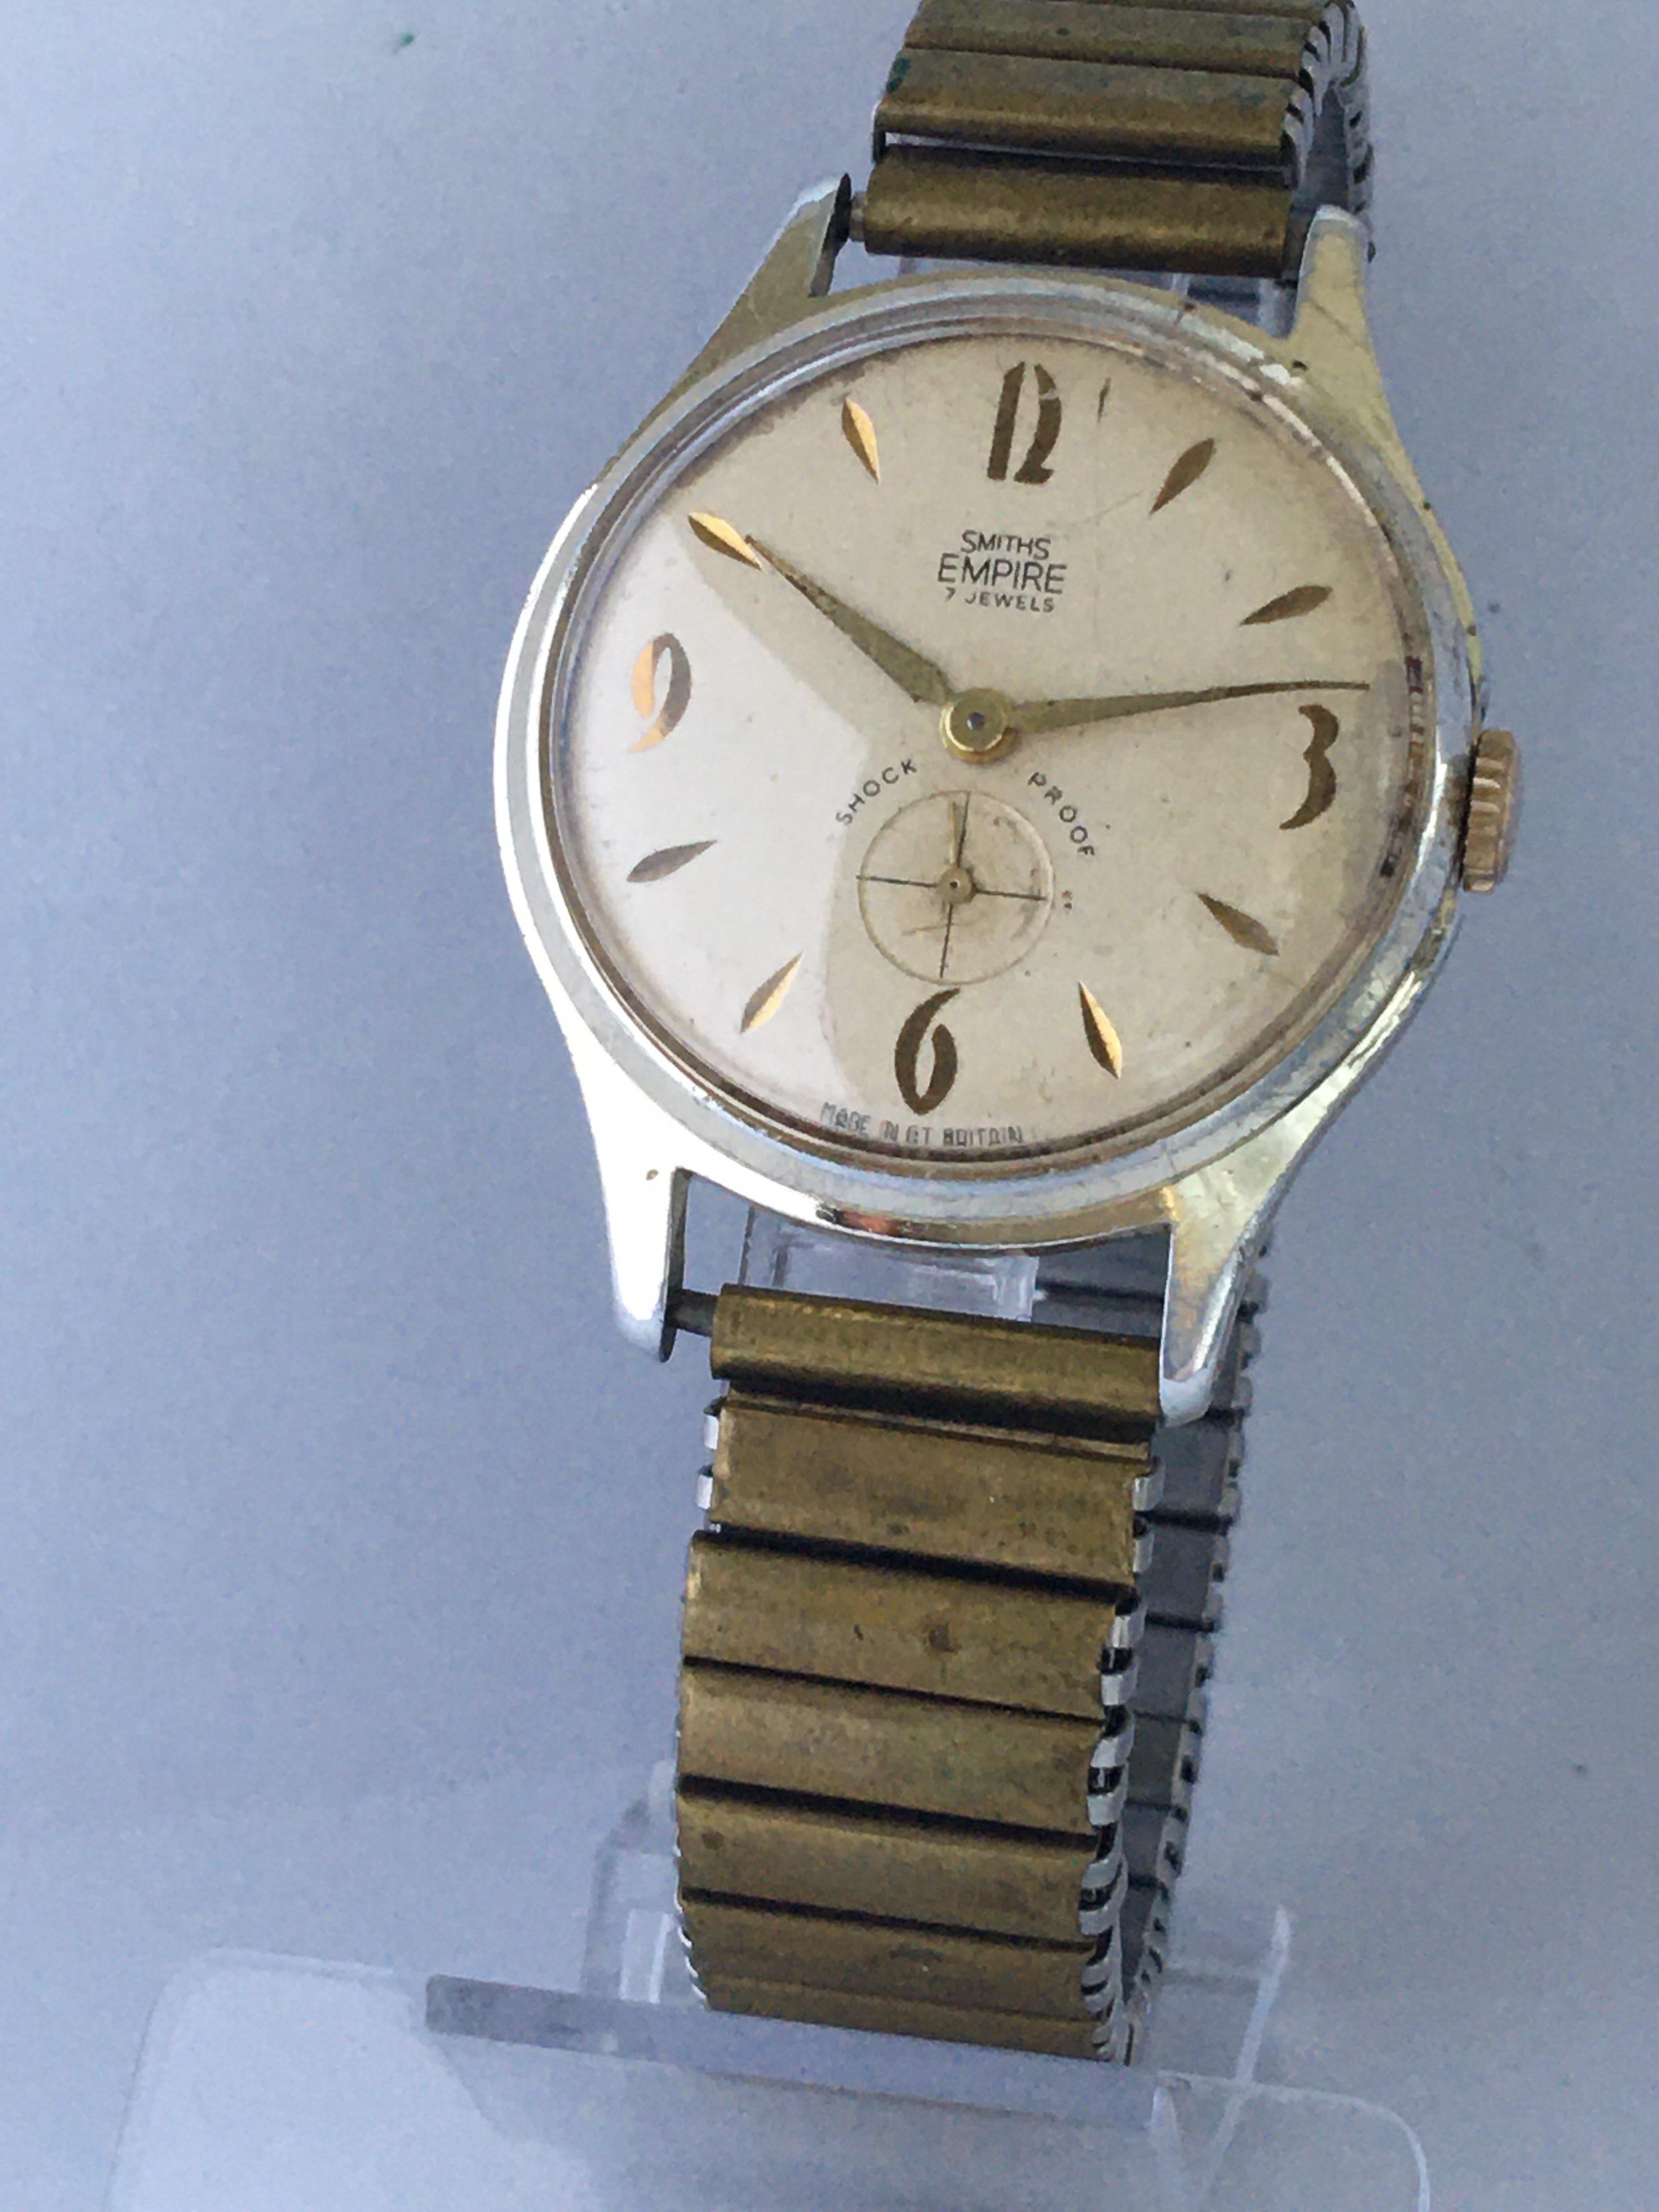 Vintage 1960s Smiths Empire Manual Winding Watch For Sale 5